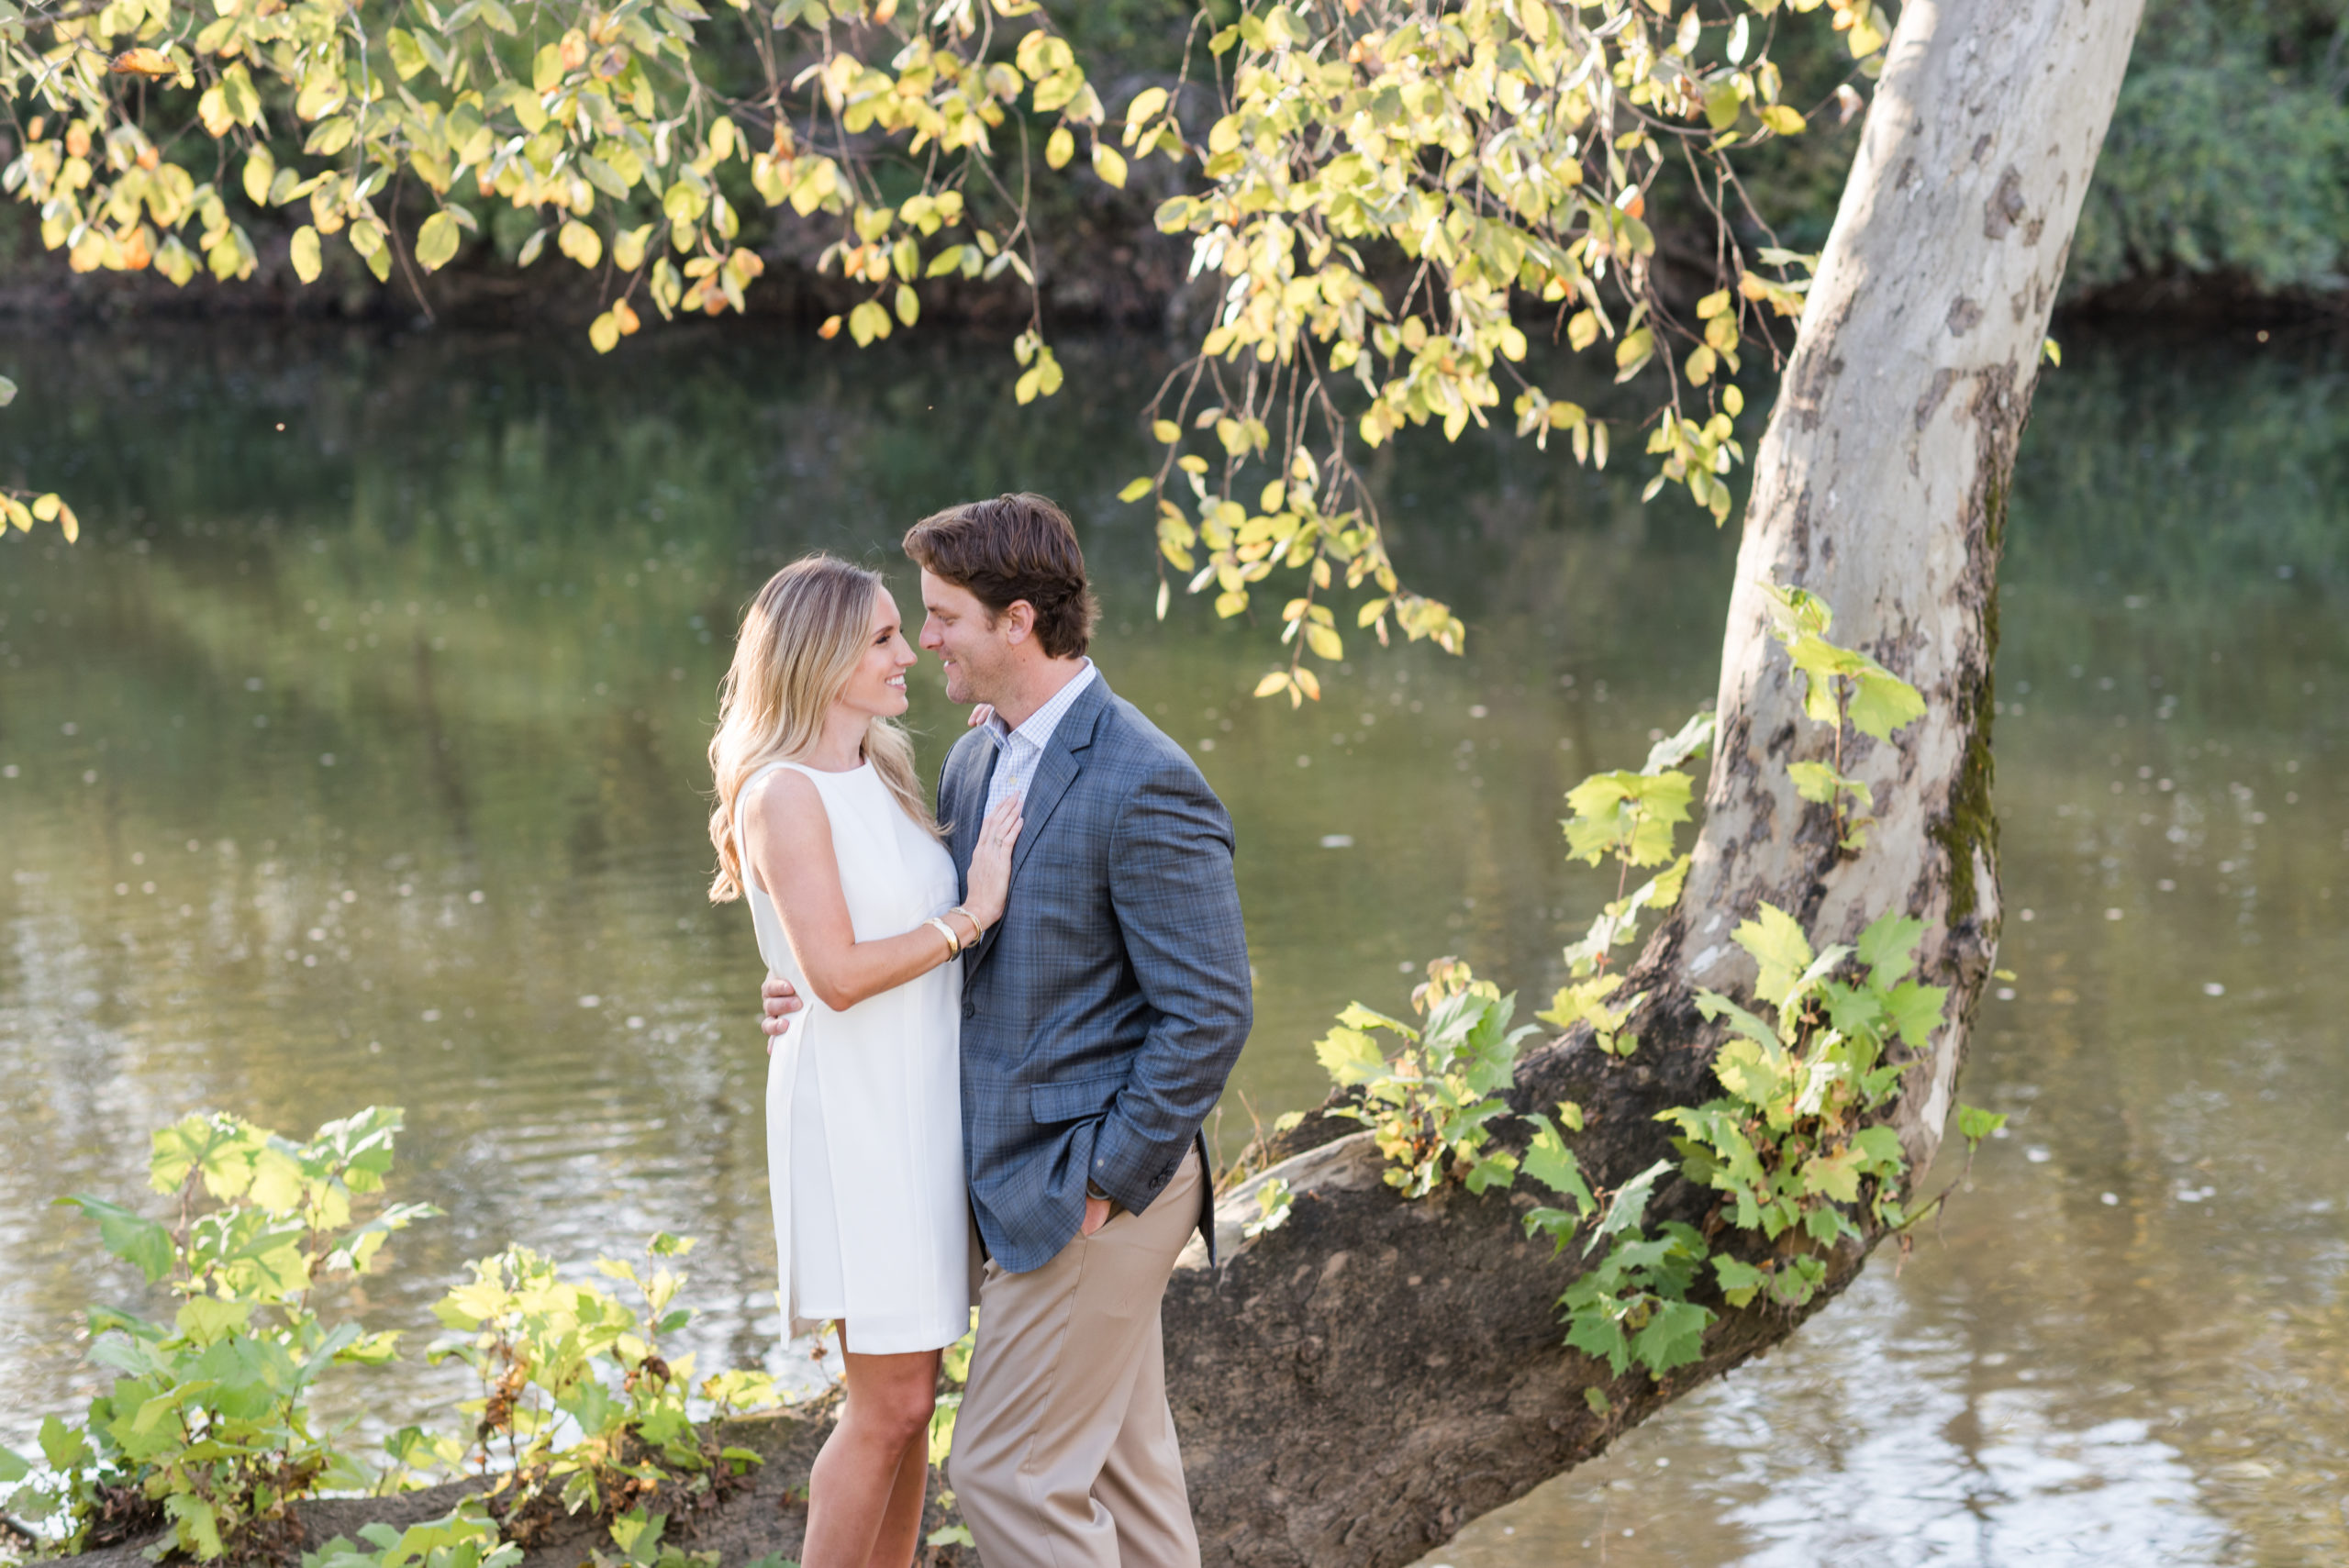 Engagement Session In Murfreesboro Tennessee Rebecca Musayev Photography